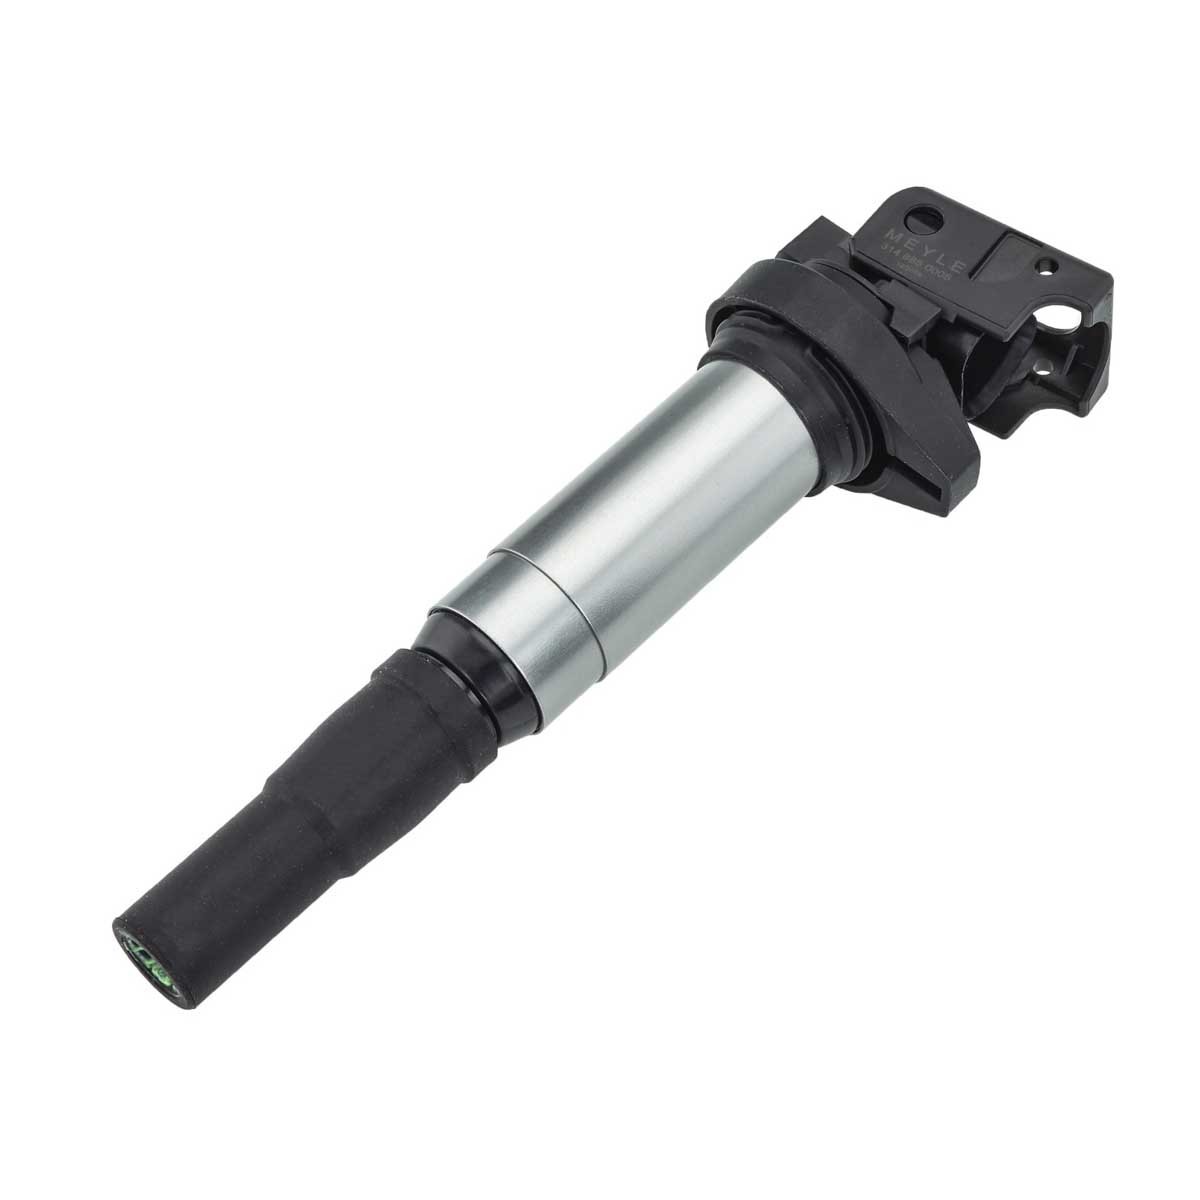 MIC0120 MEYLE 3148850005 Ignition coil 75 51 0 49